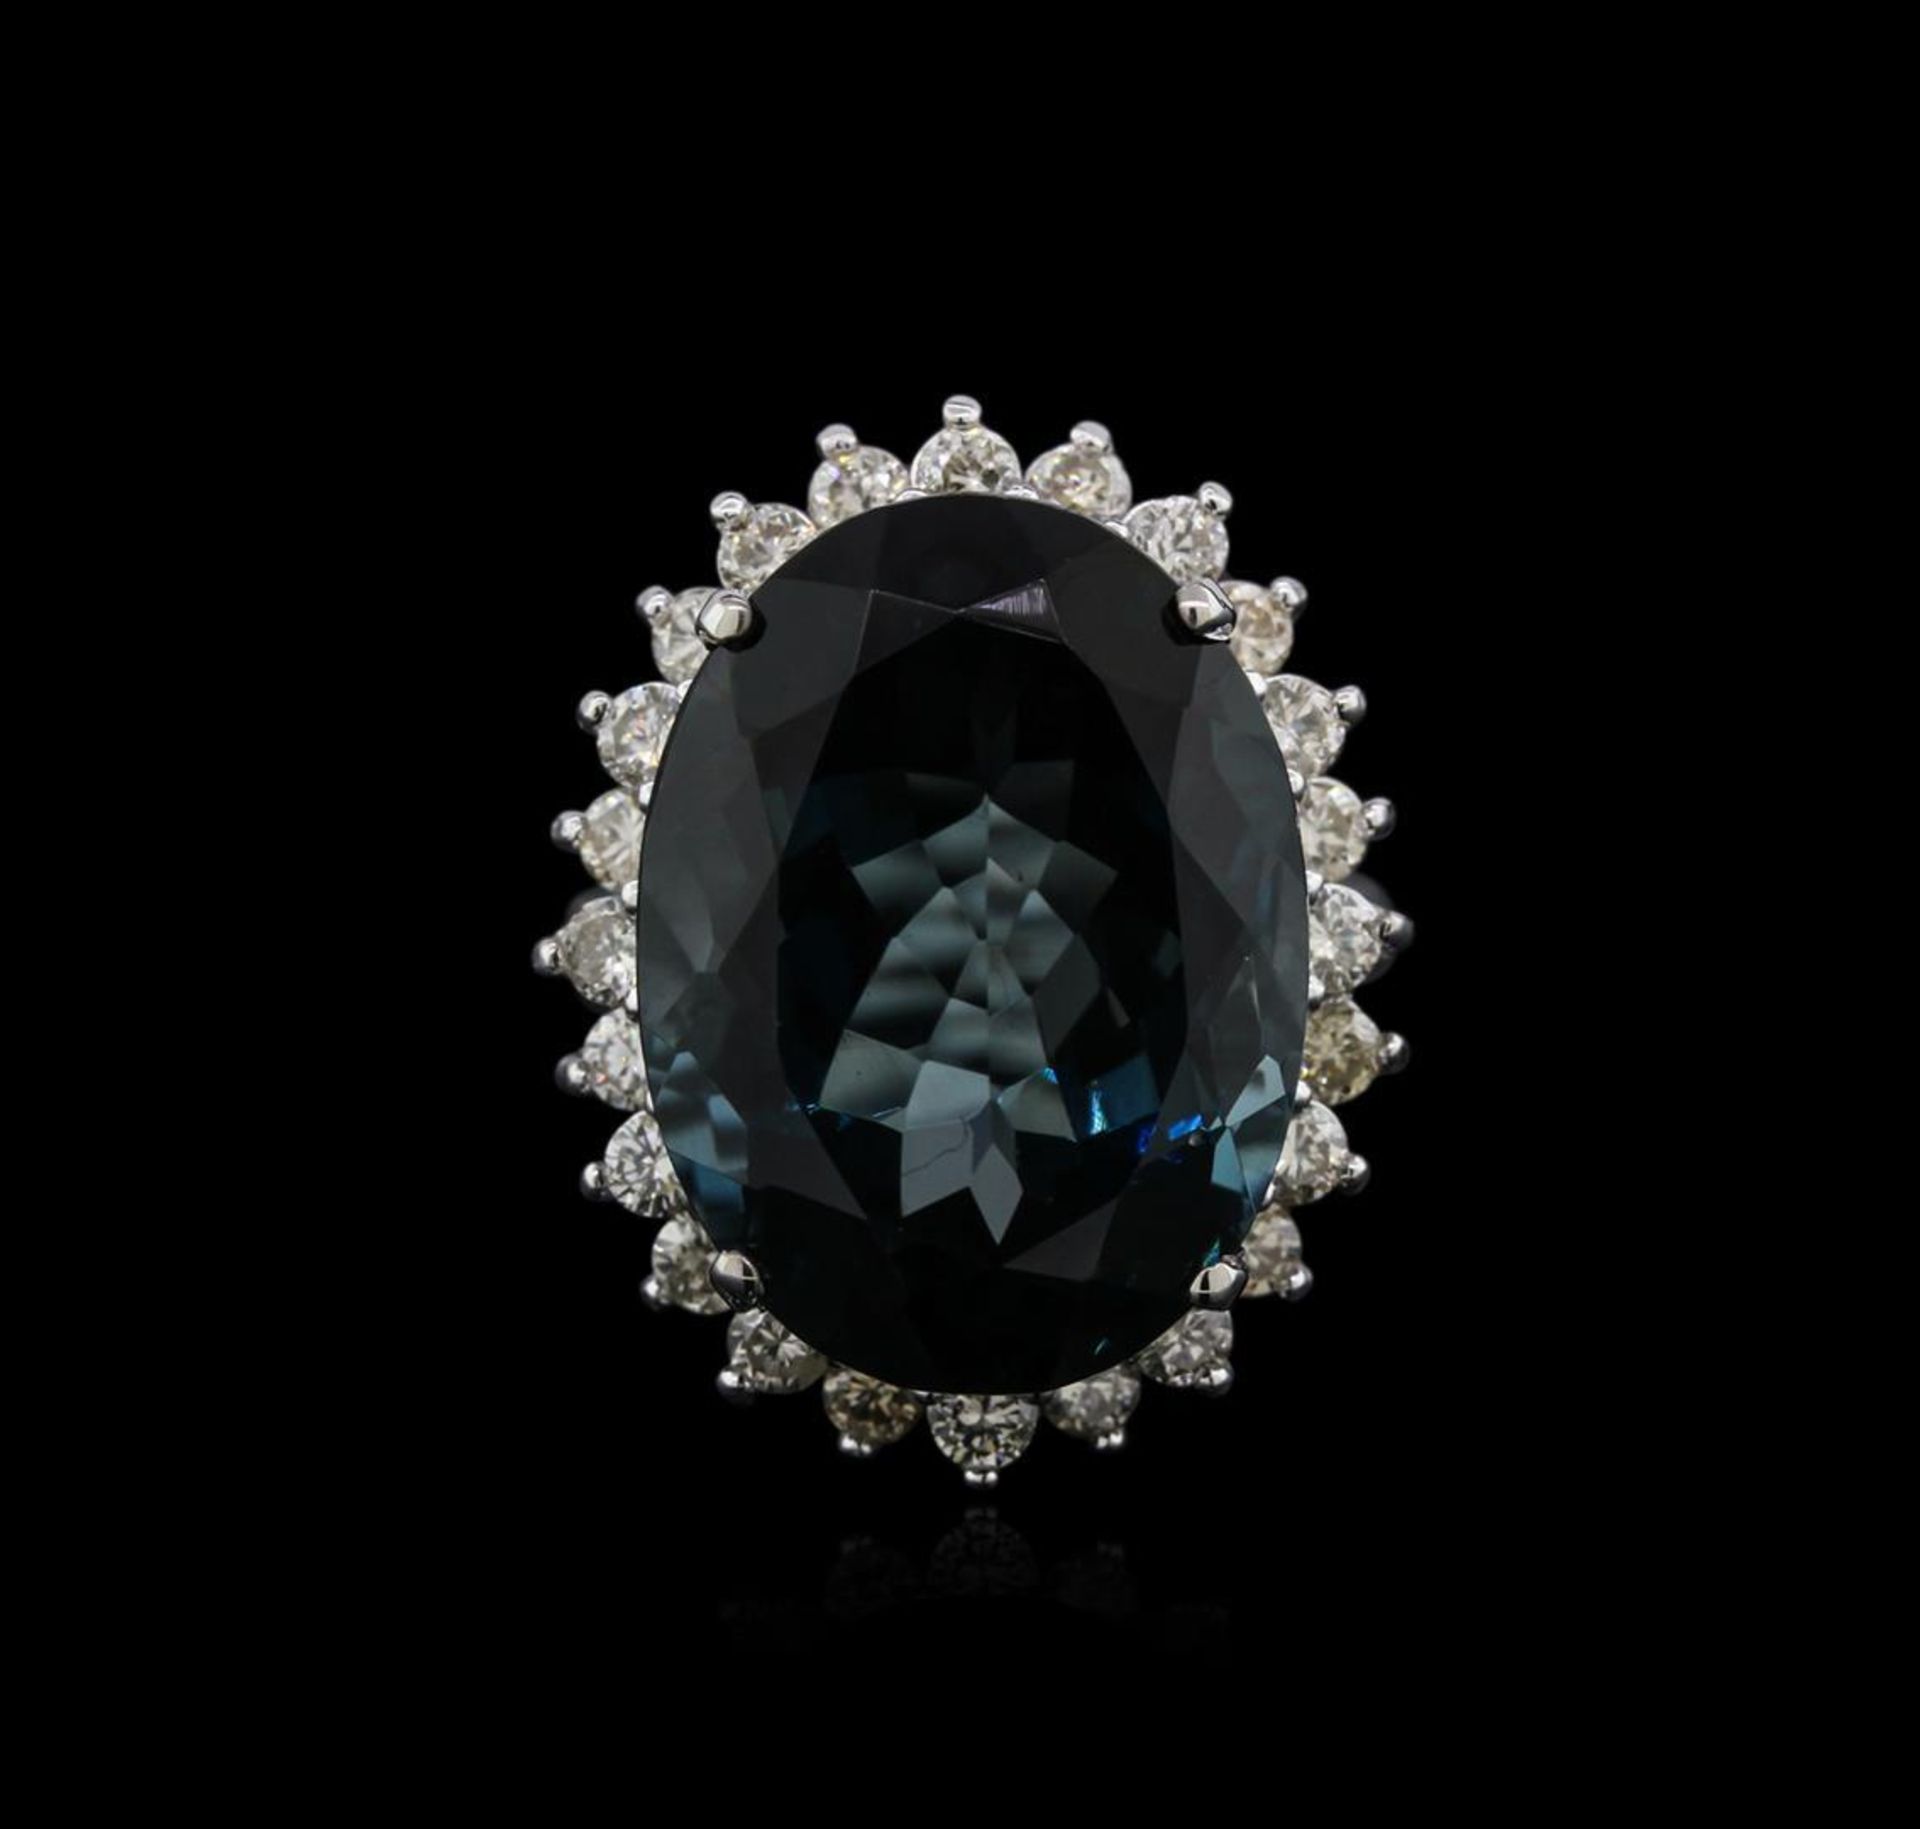 14KT White Gold 22.43 ctw Topaz and Diamond Ring - Image 2 of 4